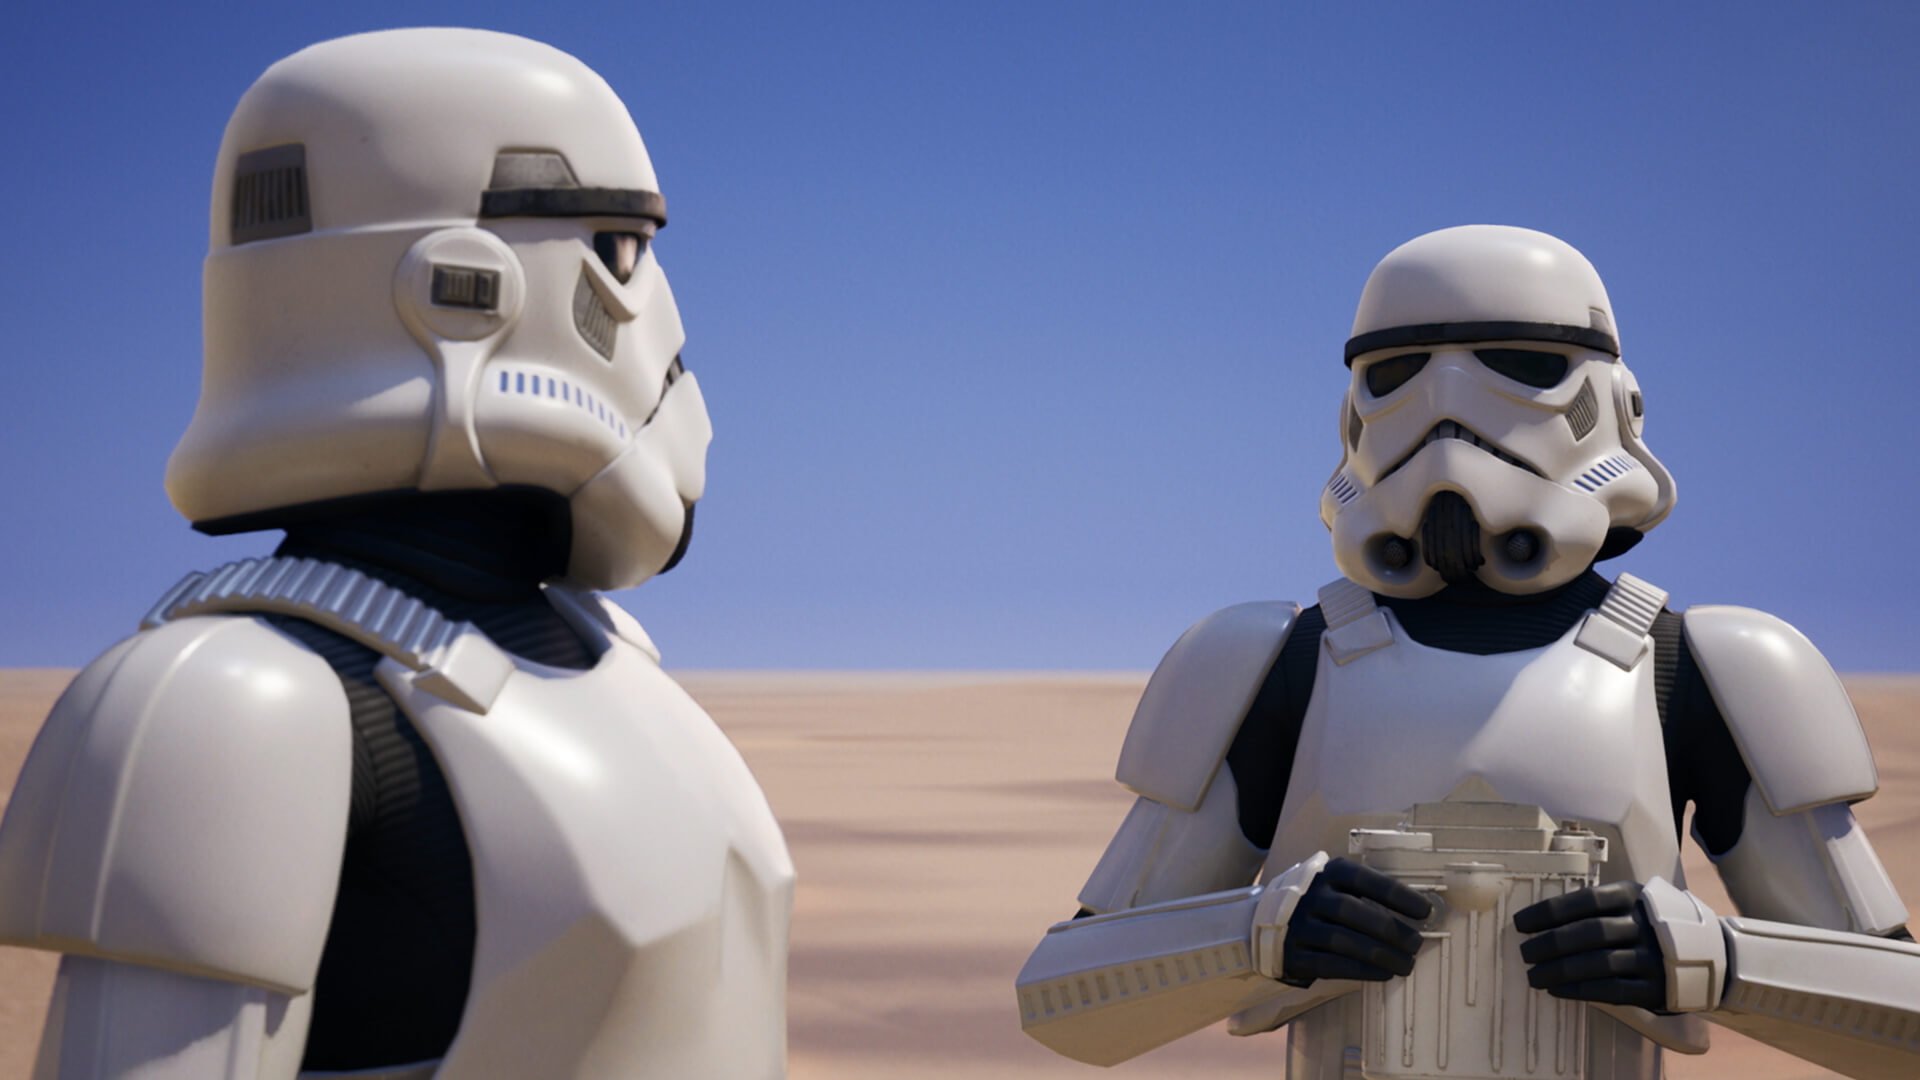 Star Wars Stormtroopers Are Added to Fortnite, and You Can Get Them for Free